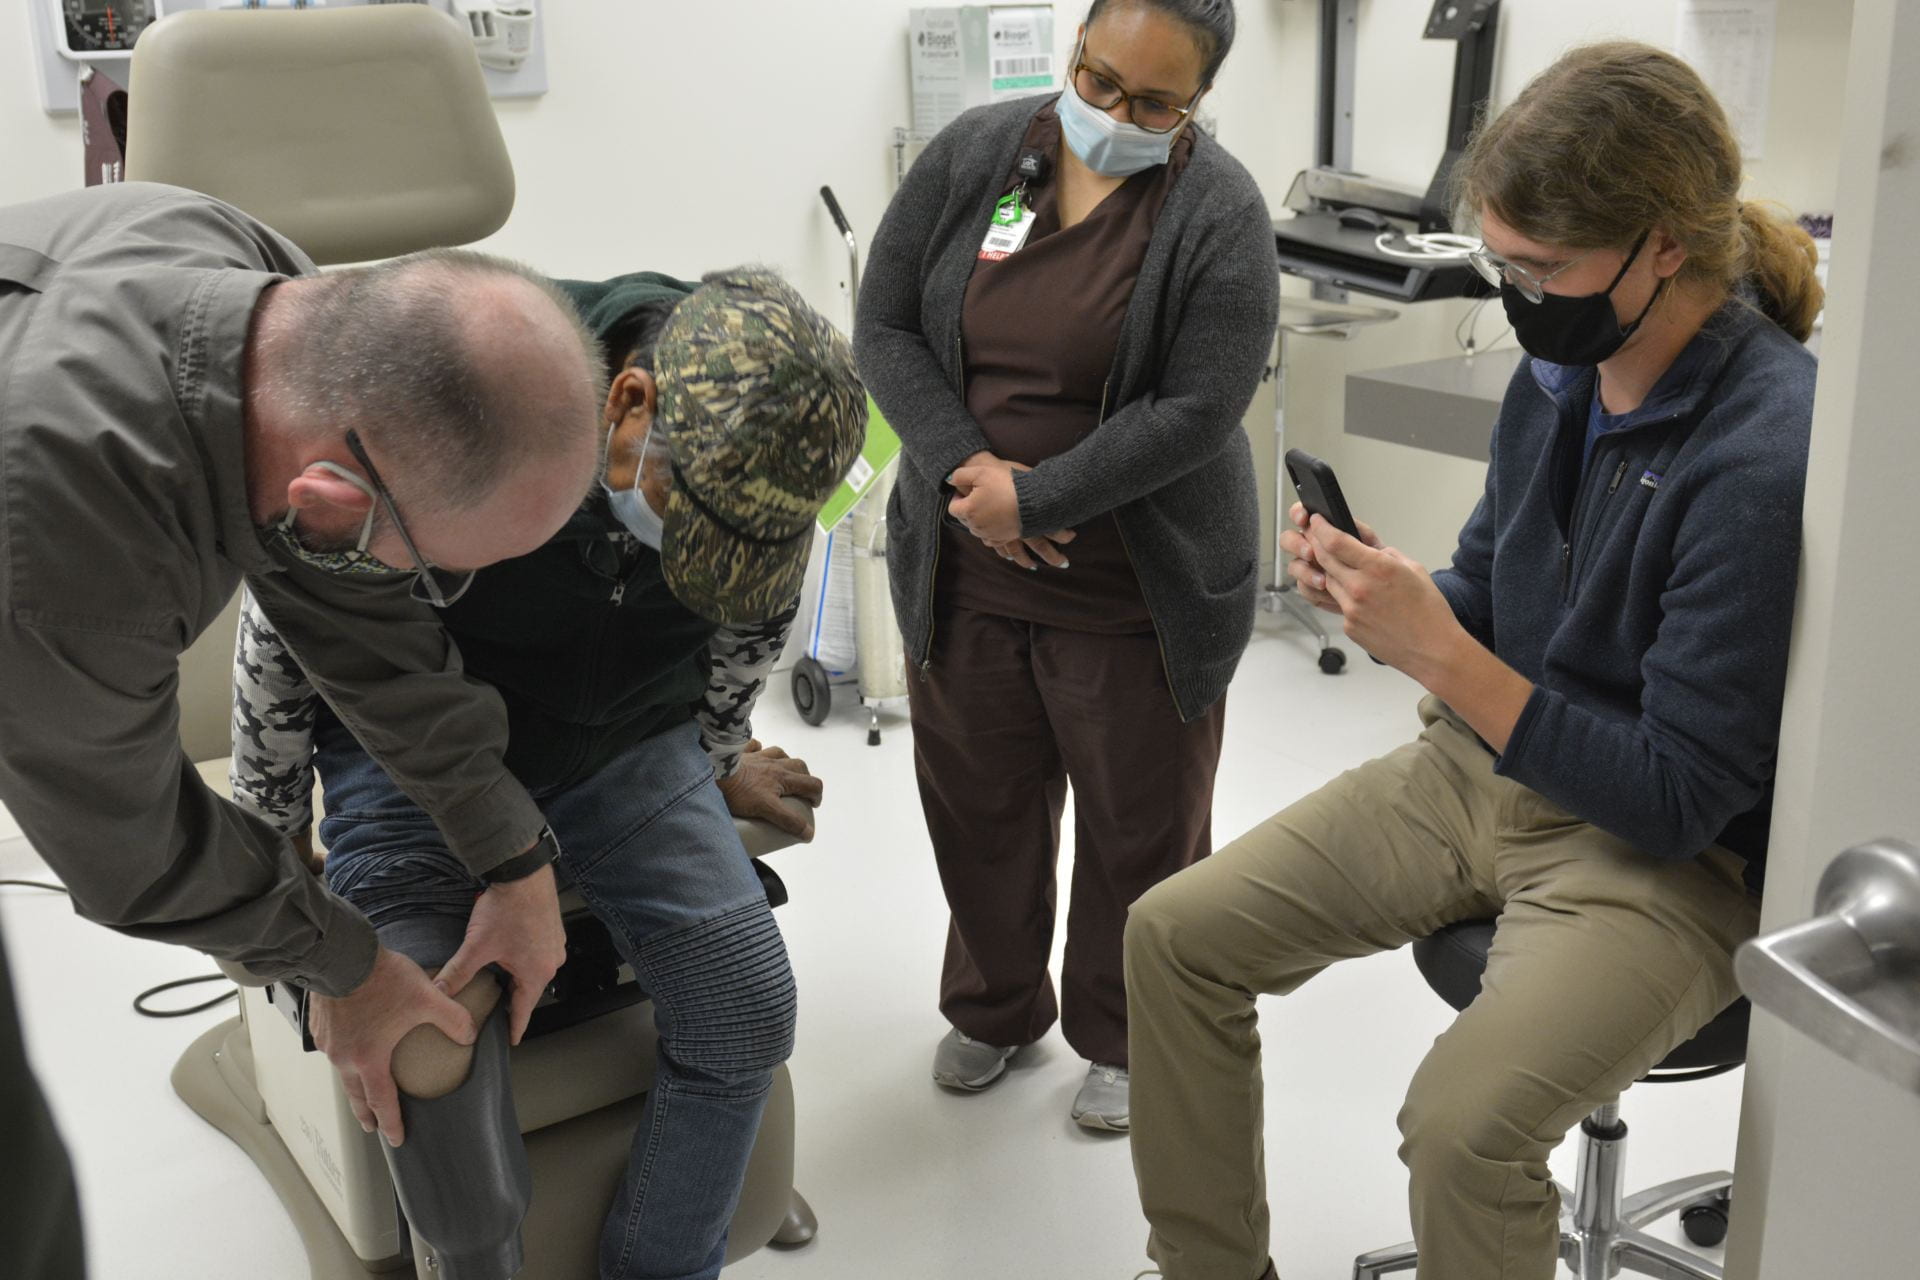 Benson Laikidrik (seated) prepares to take his first step on a new prosthetic leg as Greg Johnson from Snell Prosthetics and Orthotics (left) helps him make adjustments and student Kyle Potts (right) takes photographs